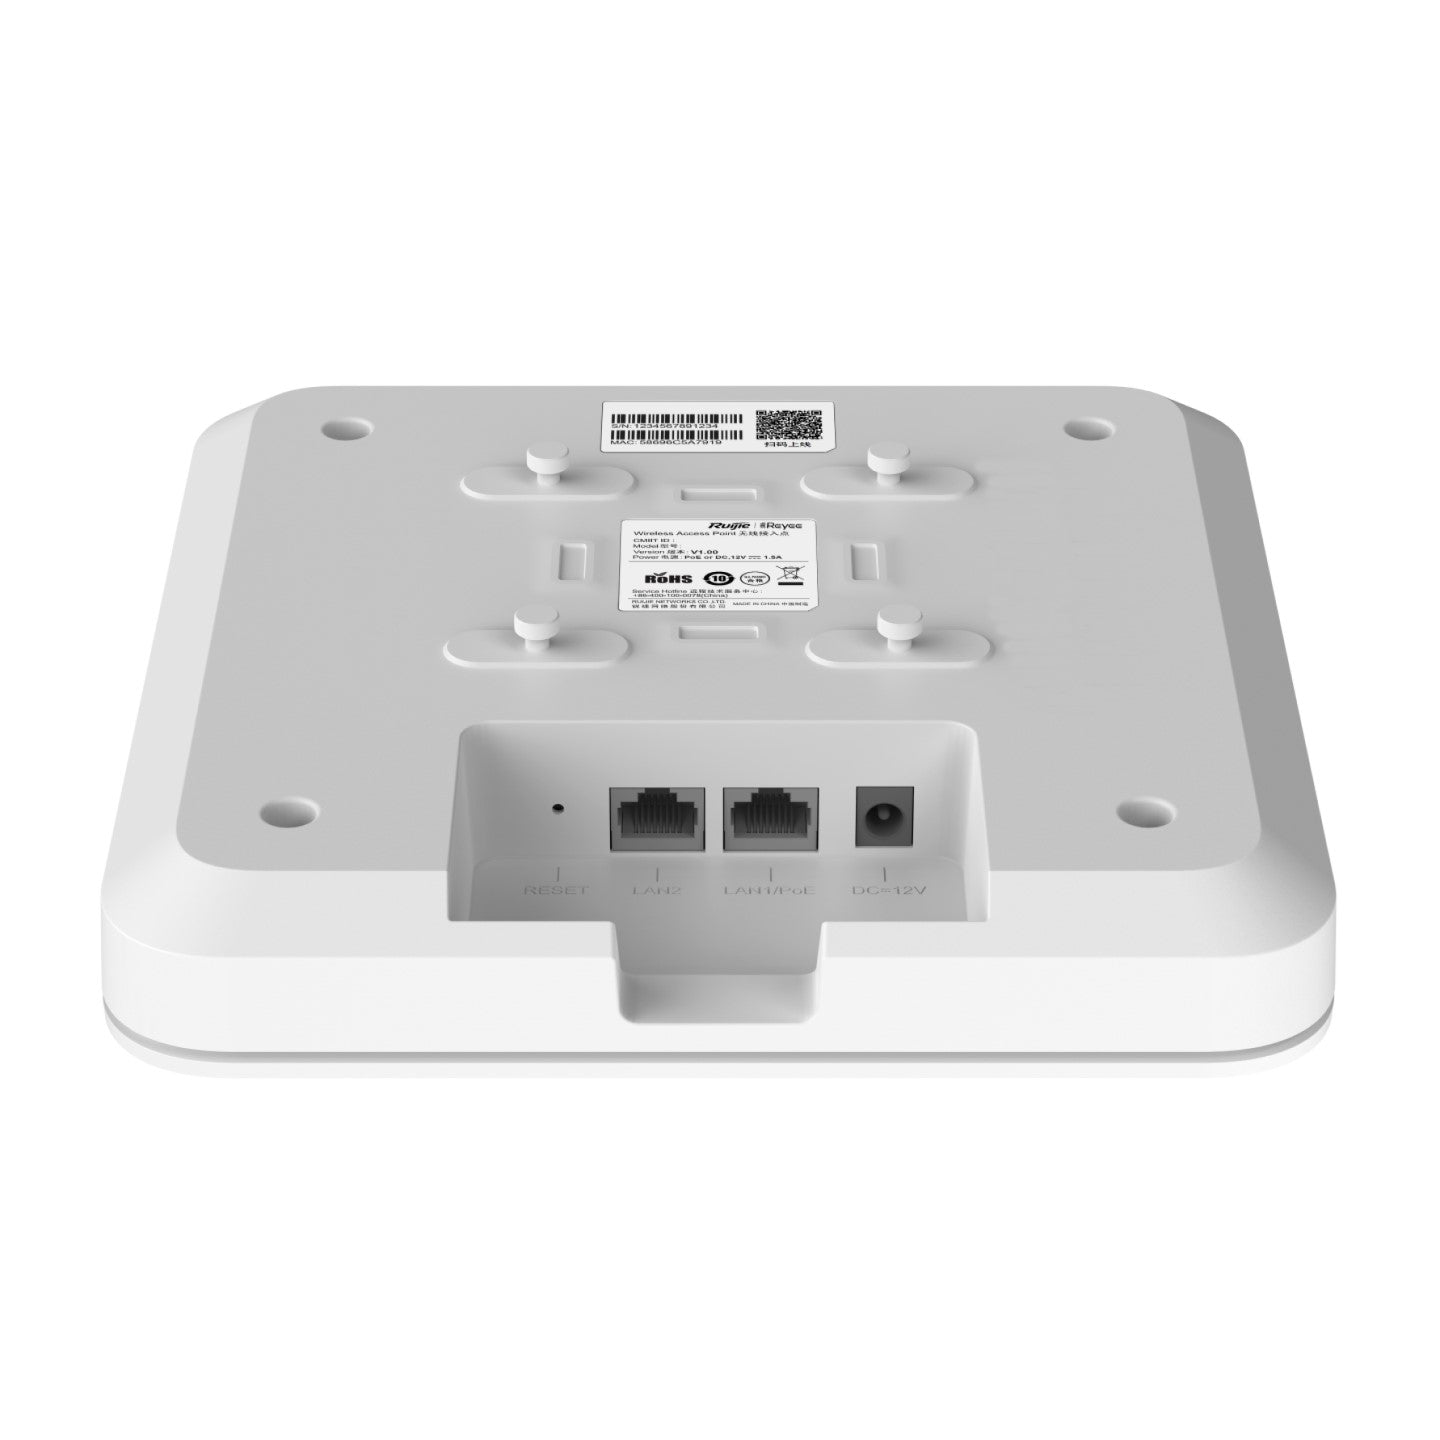 Reyee RG-RAP2260(G) Wi-Fi 6 1775Mbps Ceiling Access Point